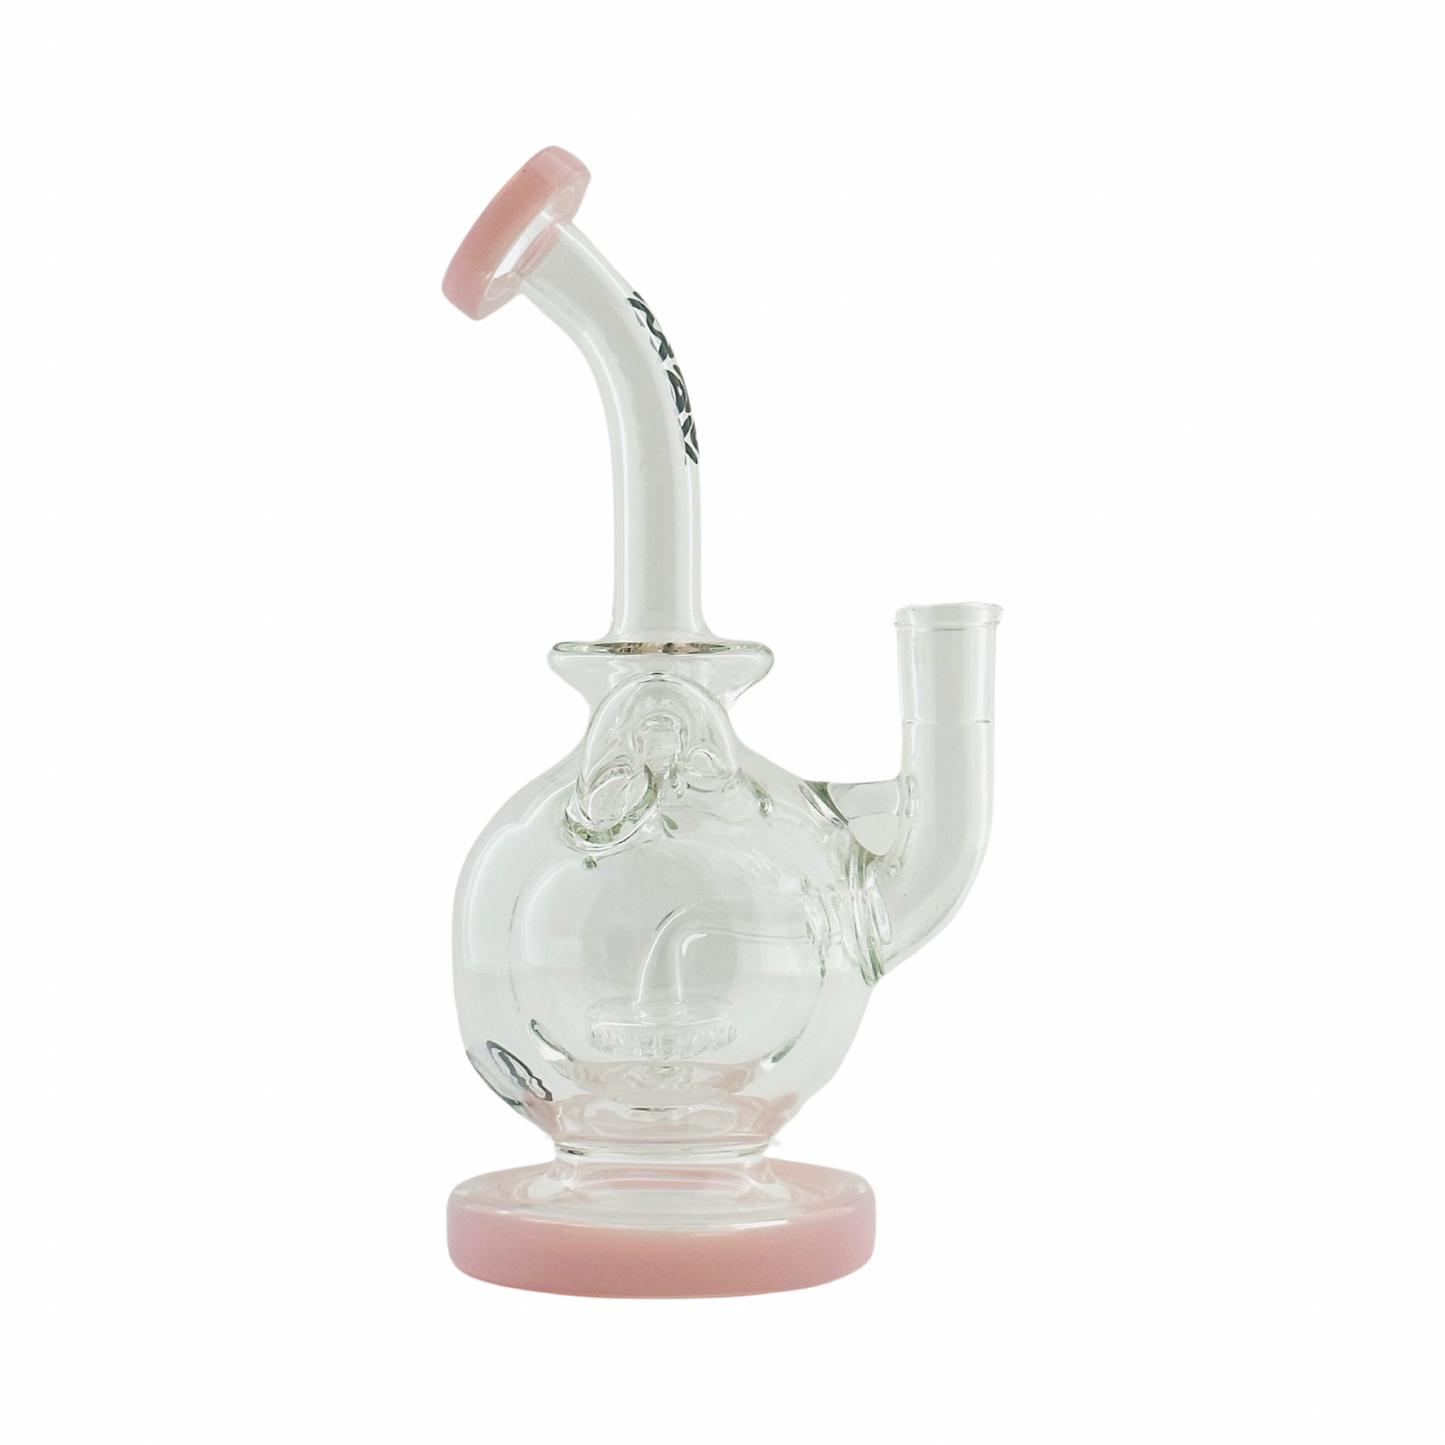 The Mojave Double Uptake Incycler Recycler